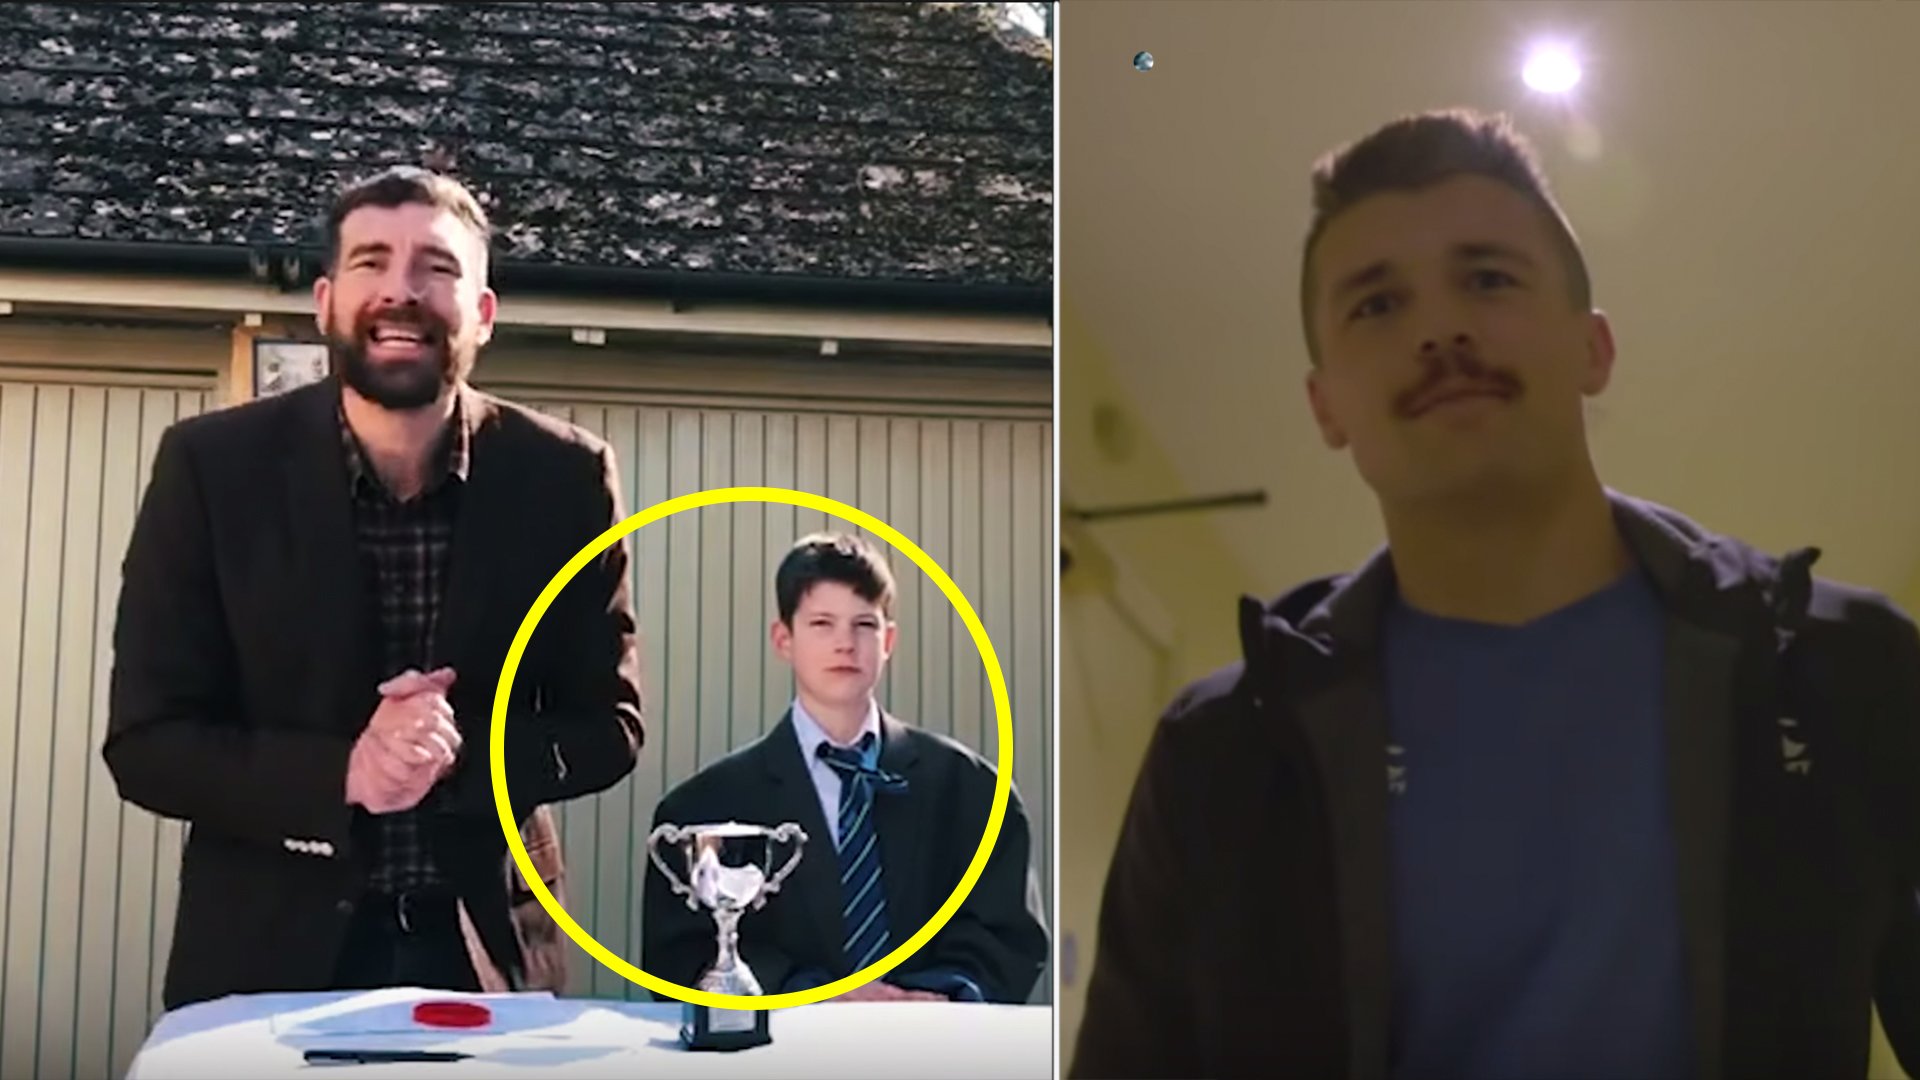 Hilarious video reveals that professional rugby players are competing in FIFA 20 tournament against each other